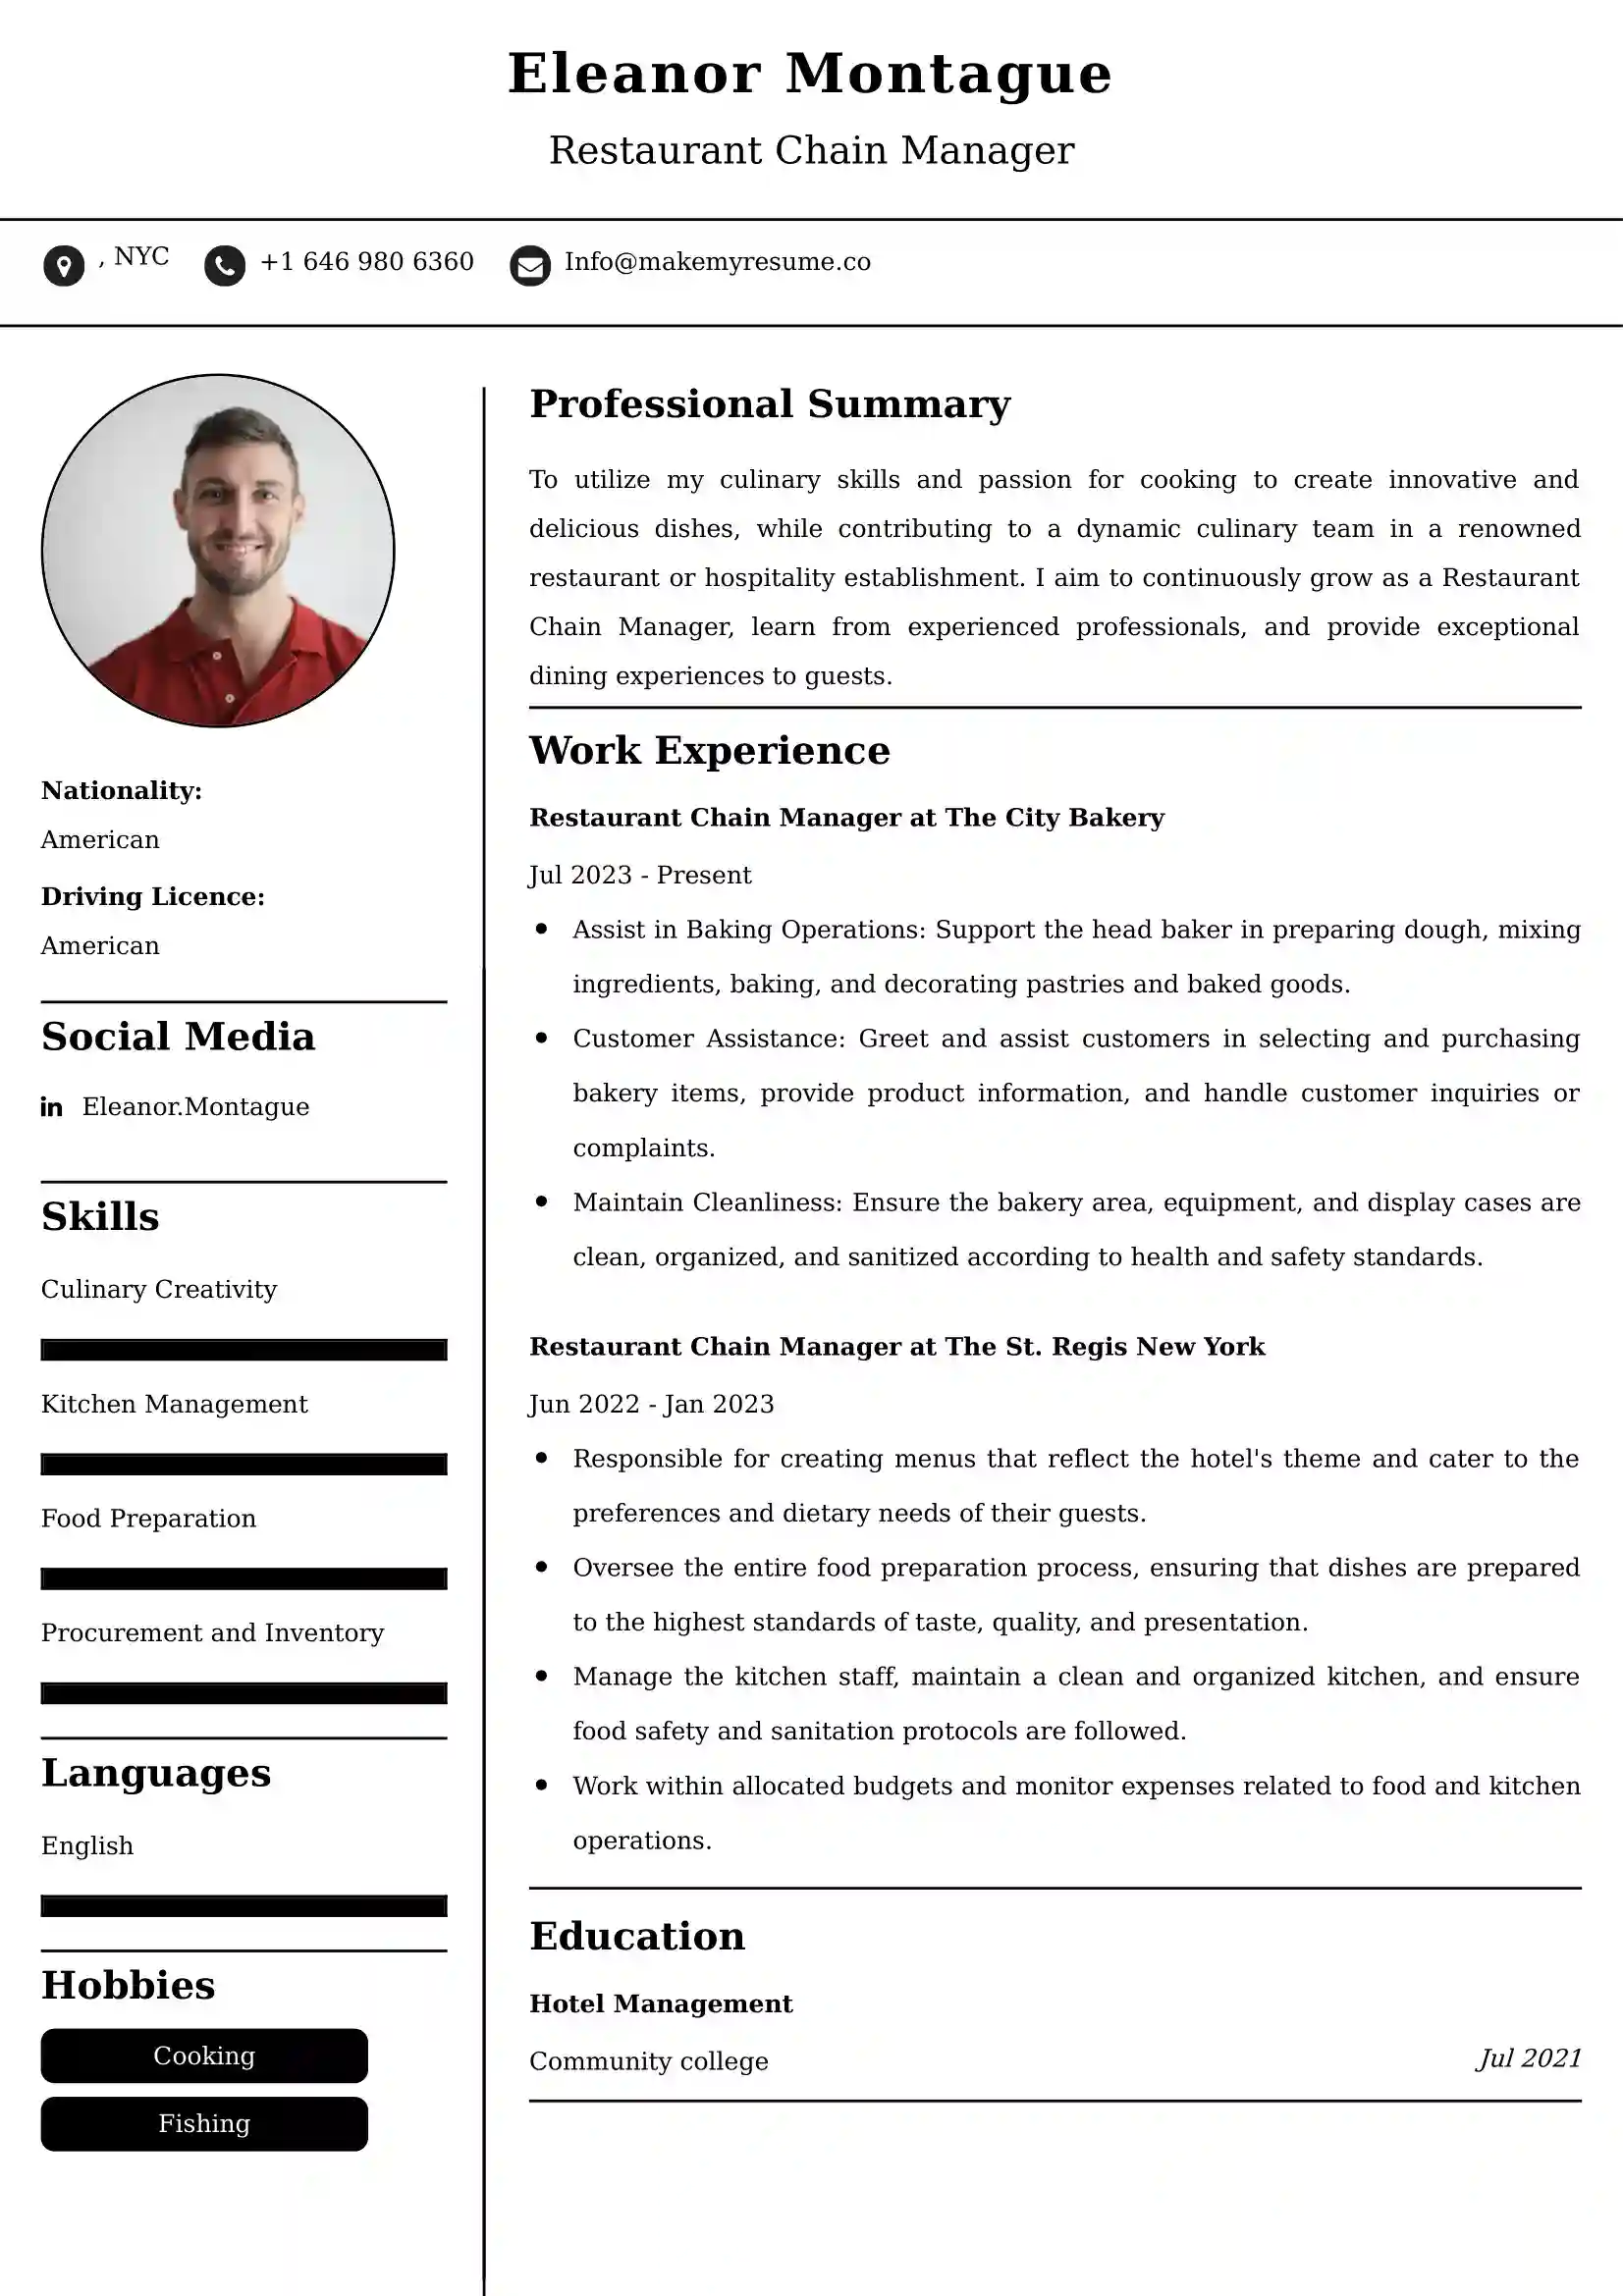 Restaurant Chain Manager CV Examples - US Format